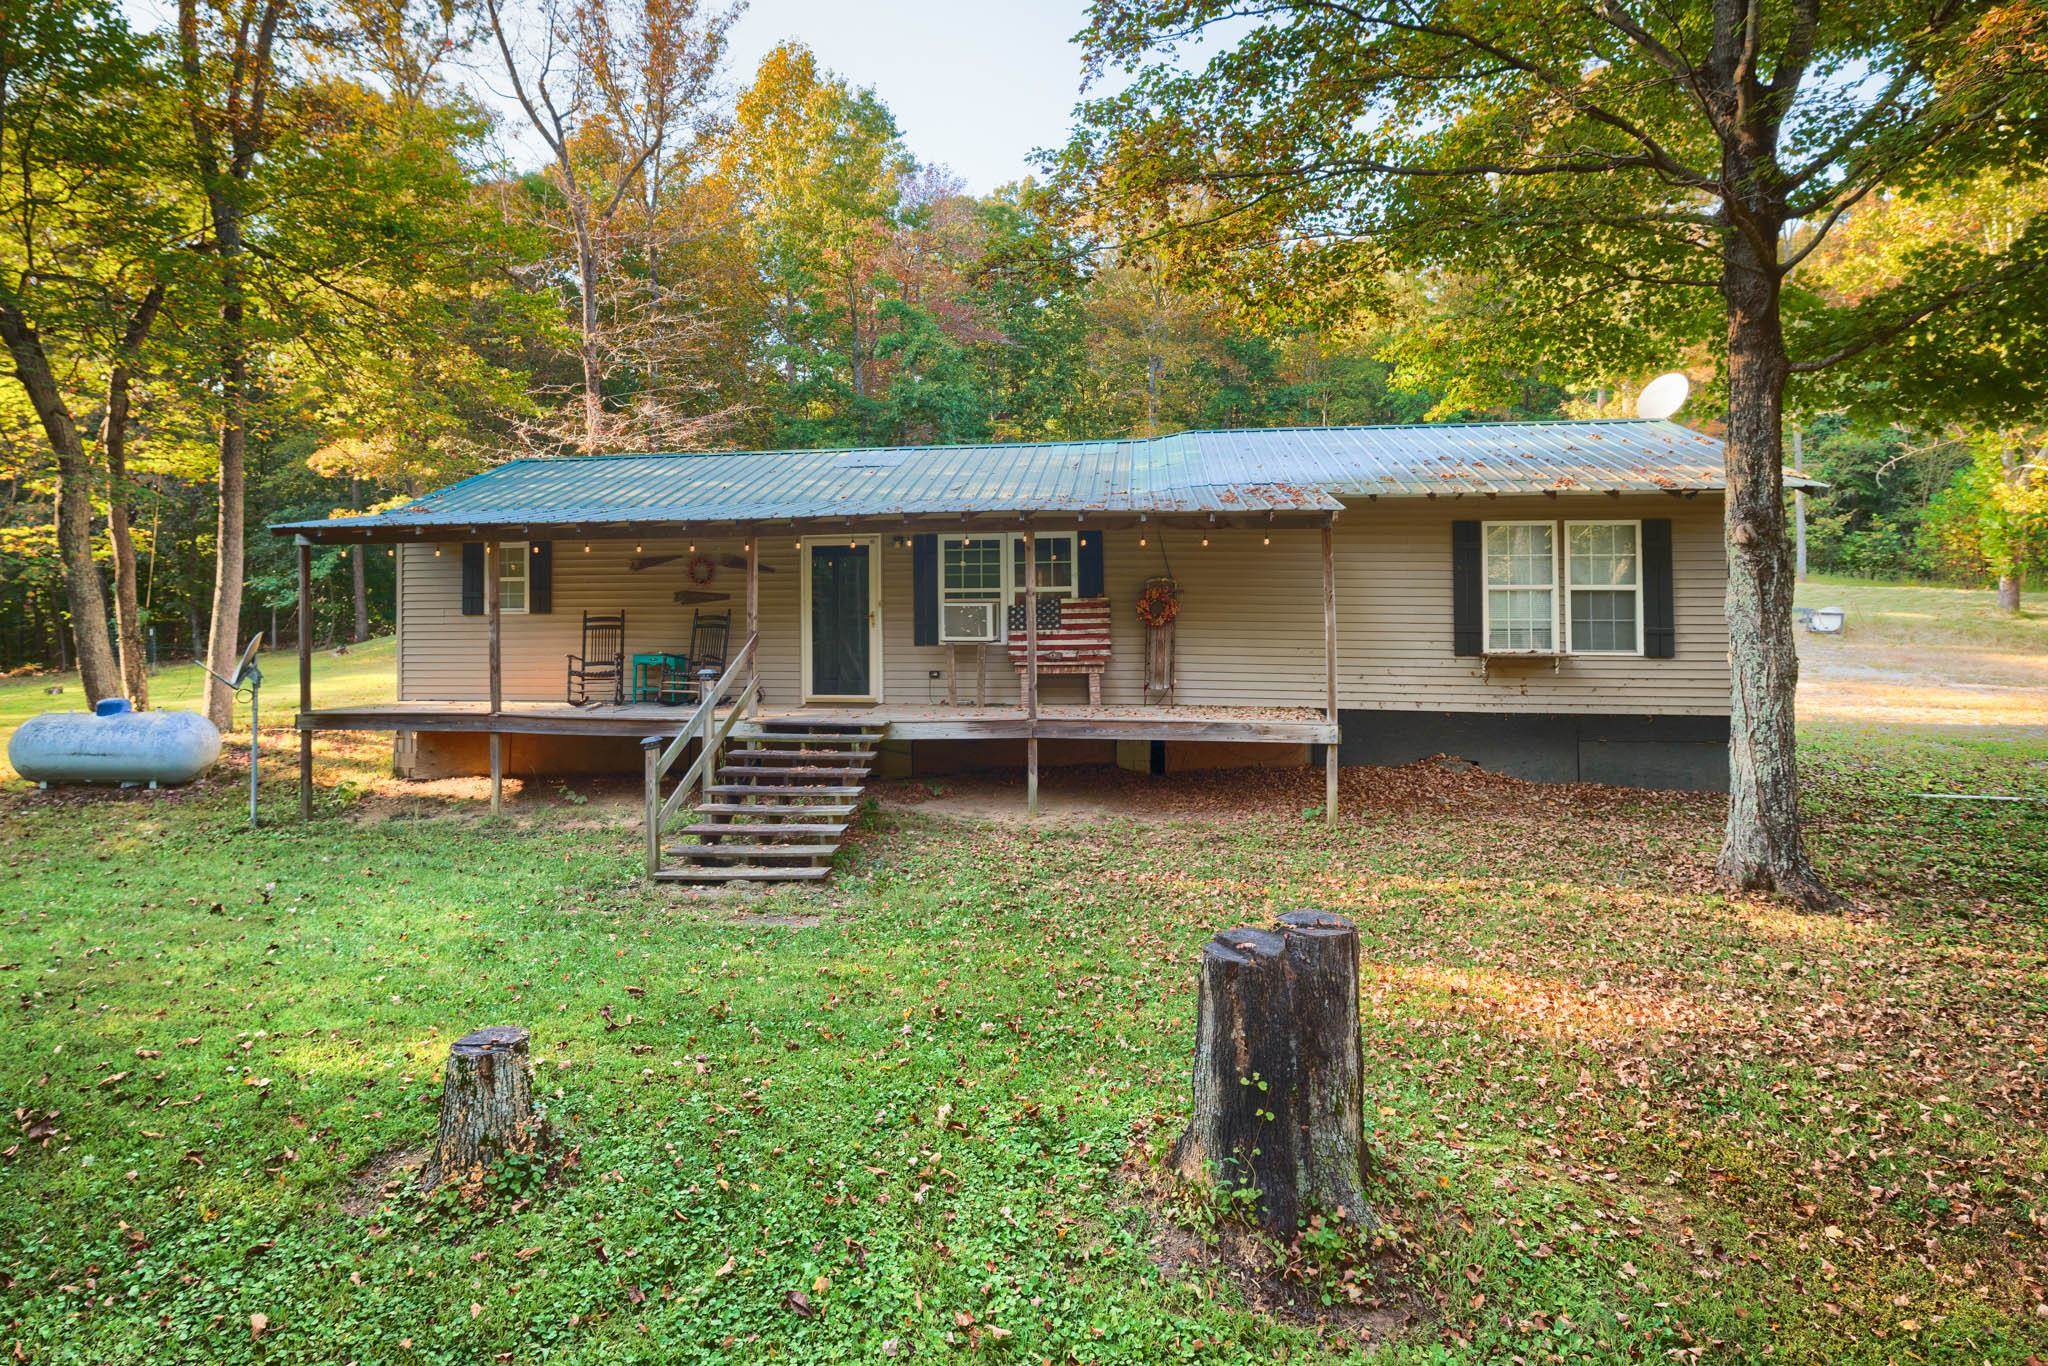 7125 US HWY 60 E, Hawesville, Kentucky 42348, 2 Bedrooms Bedrooms, ,1 BathroomBathrooms,Farm,For Sale,US HWY 60 E,88102